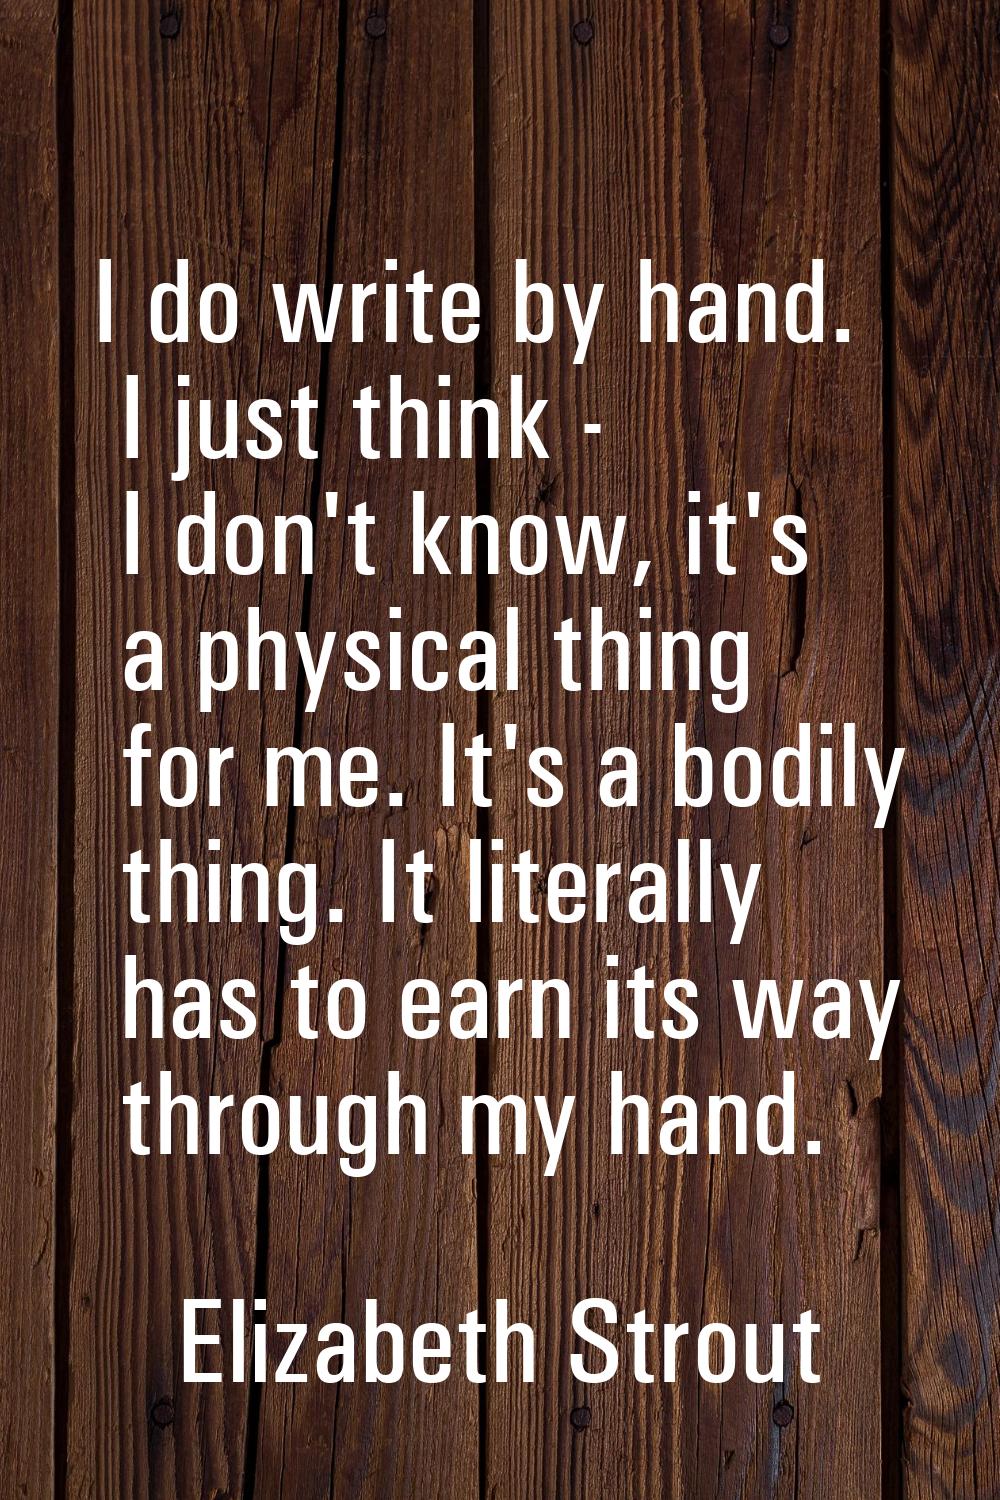 I do write by hand. I just think - I don't know, it's a physical thing for me. It's a bodily thing.